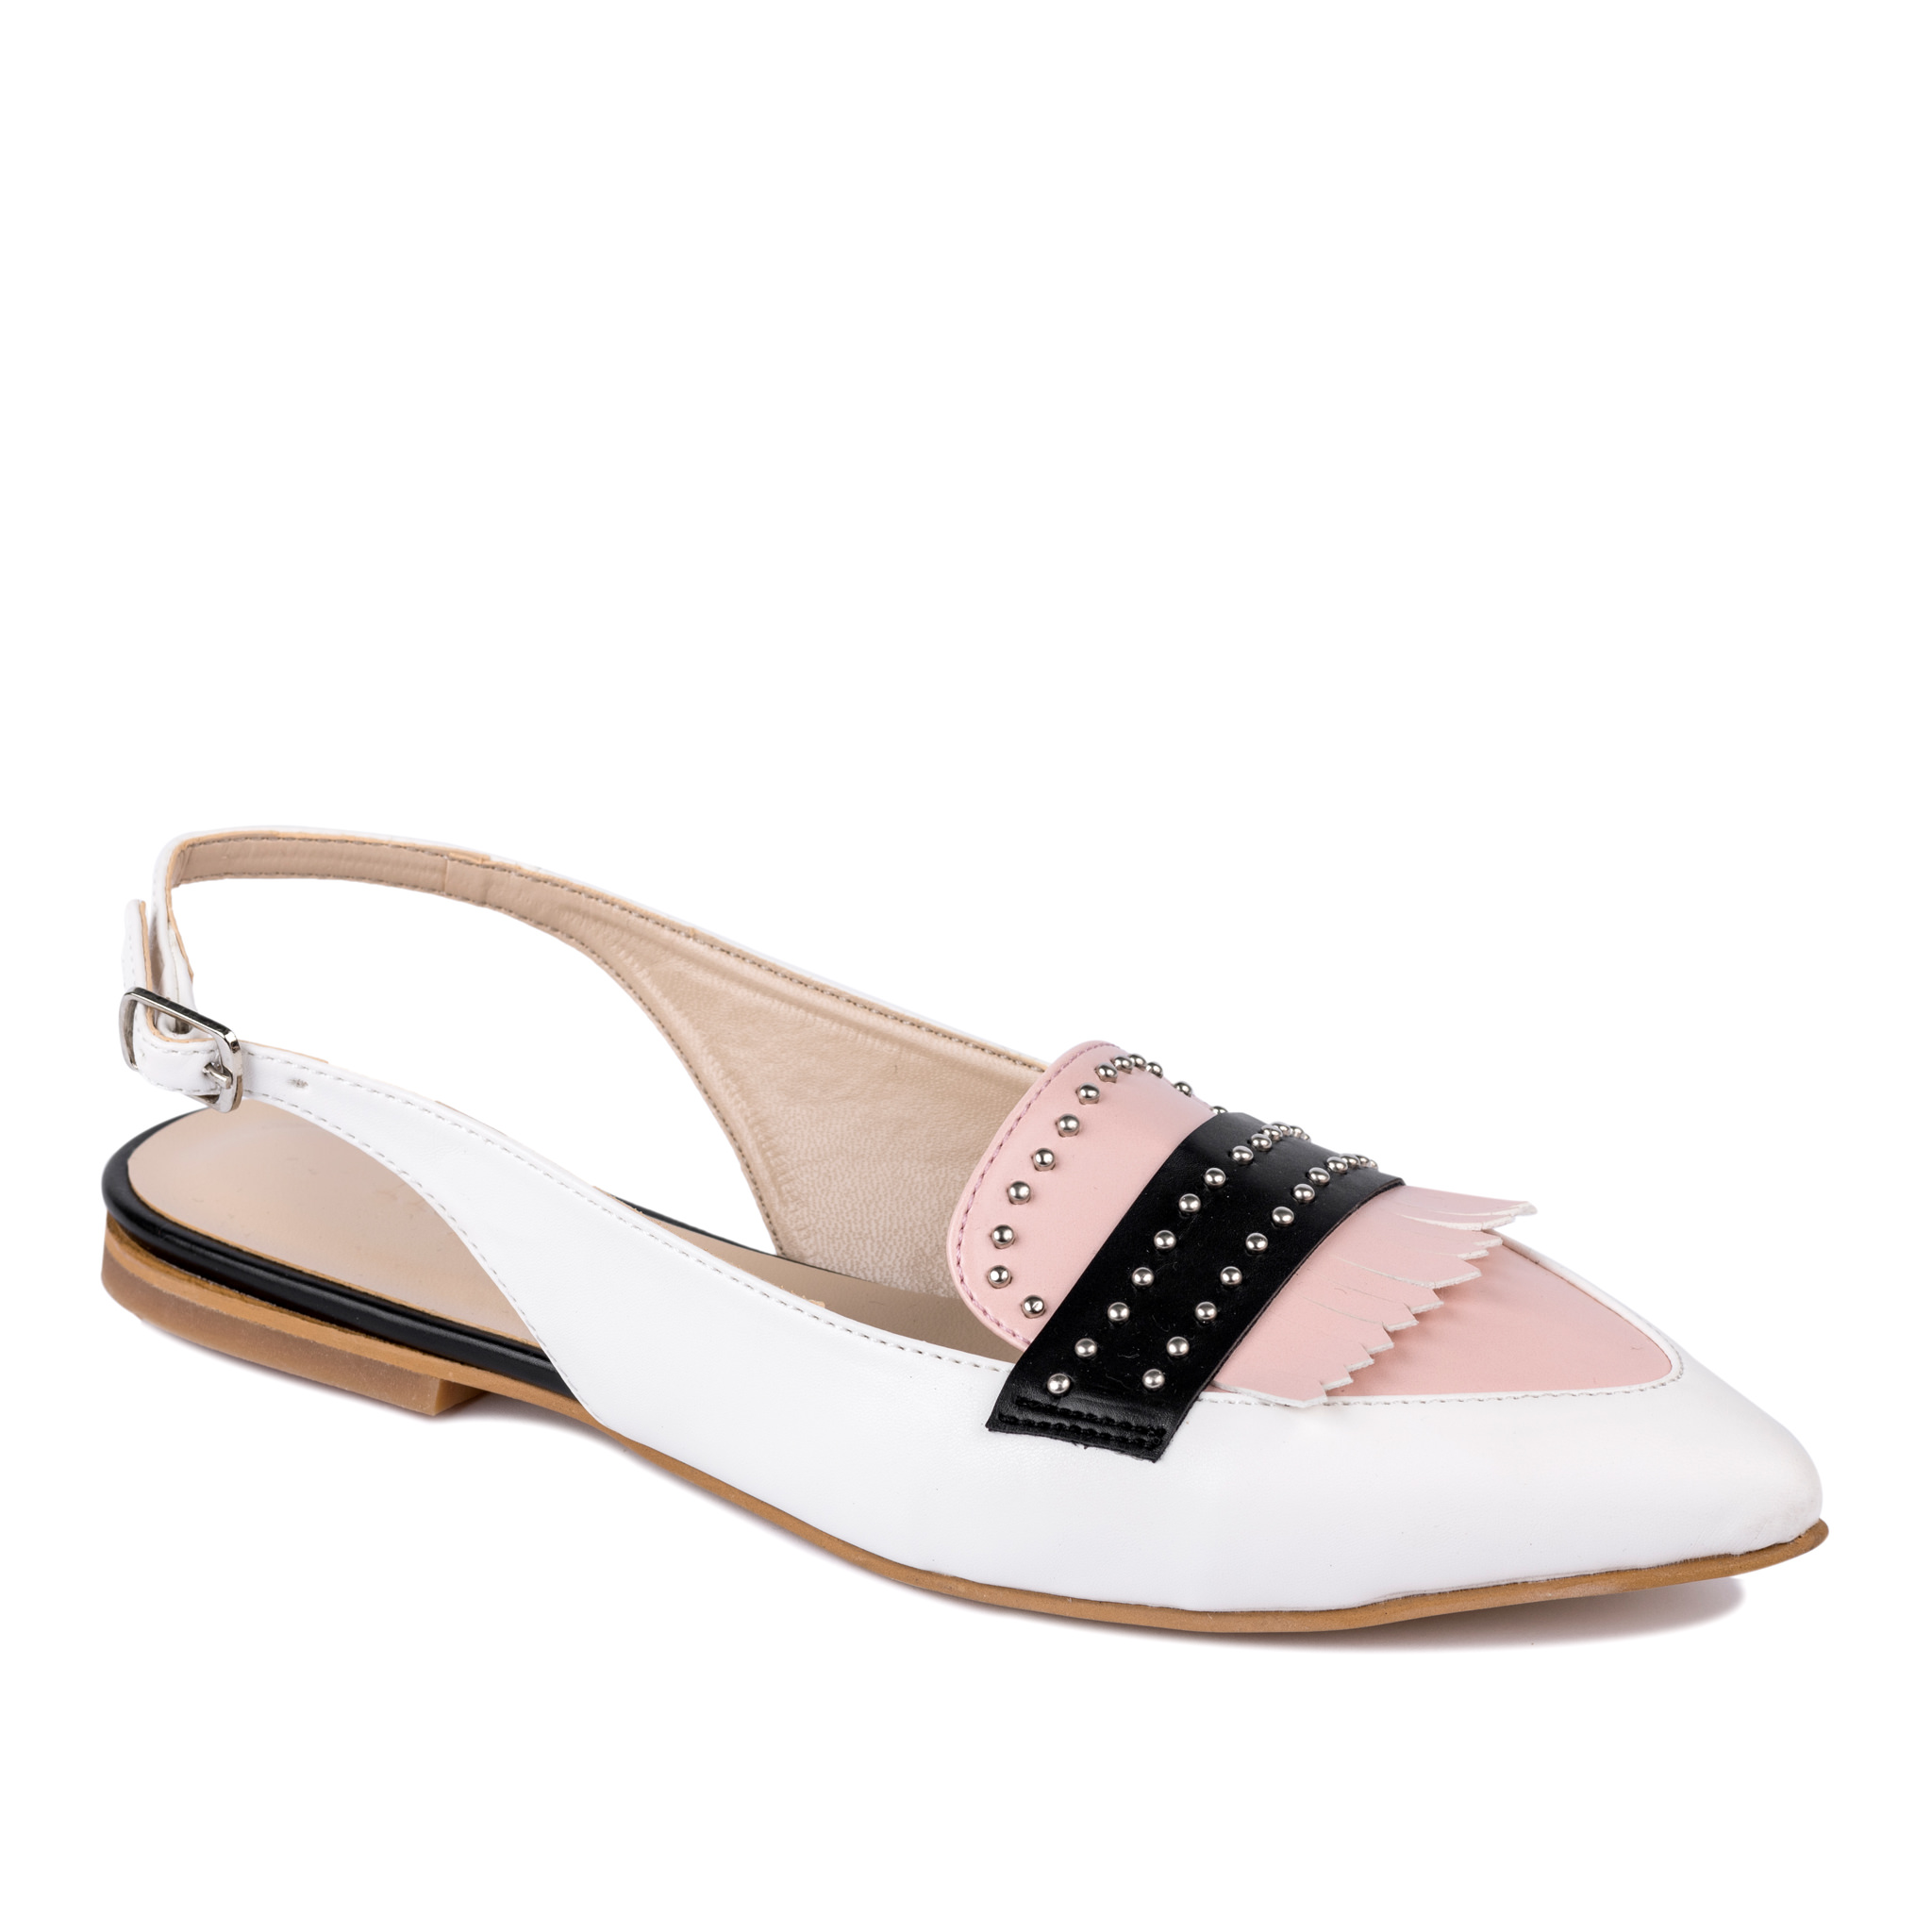 POINTED FLAT SANDALS WITH RIVETS - WHITE